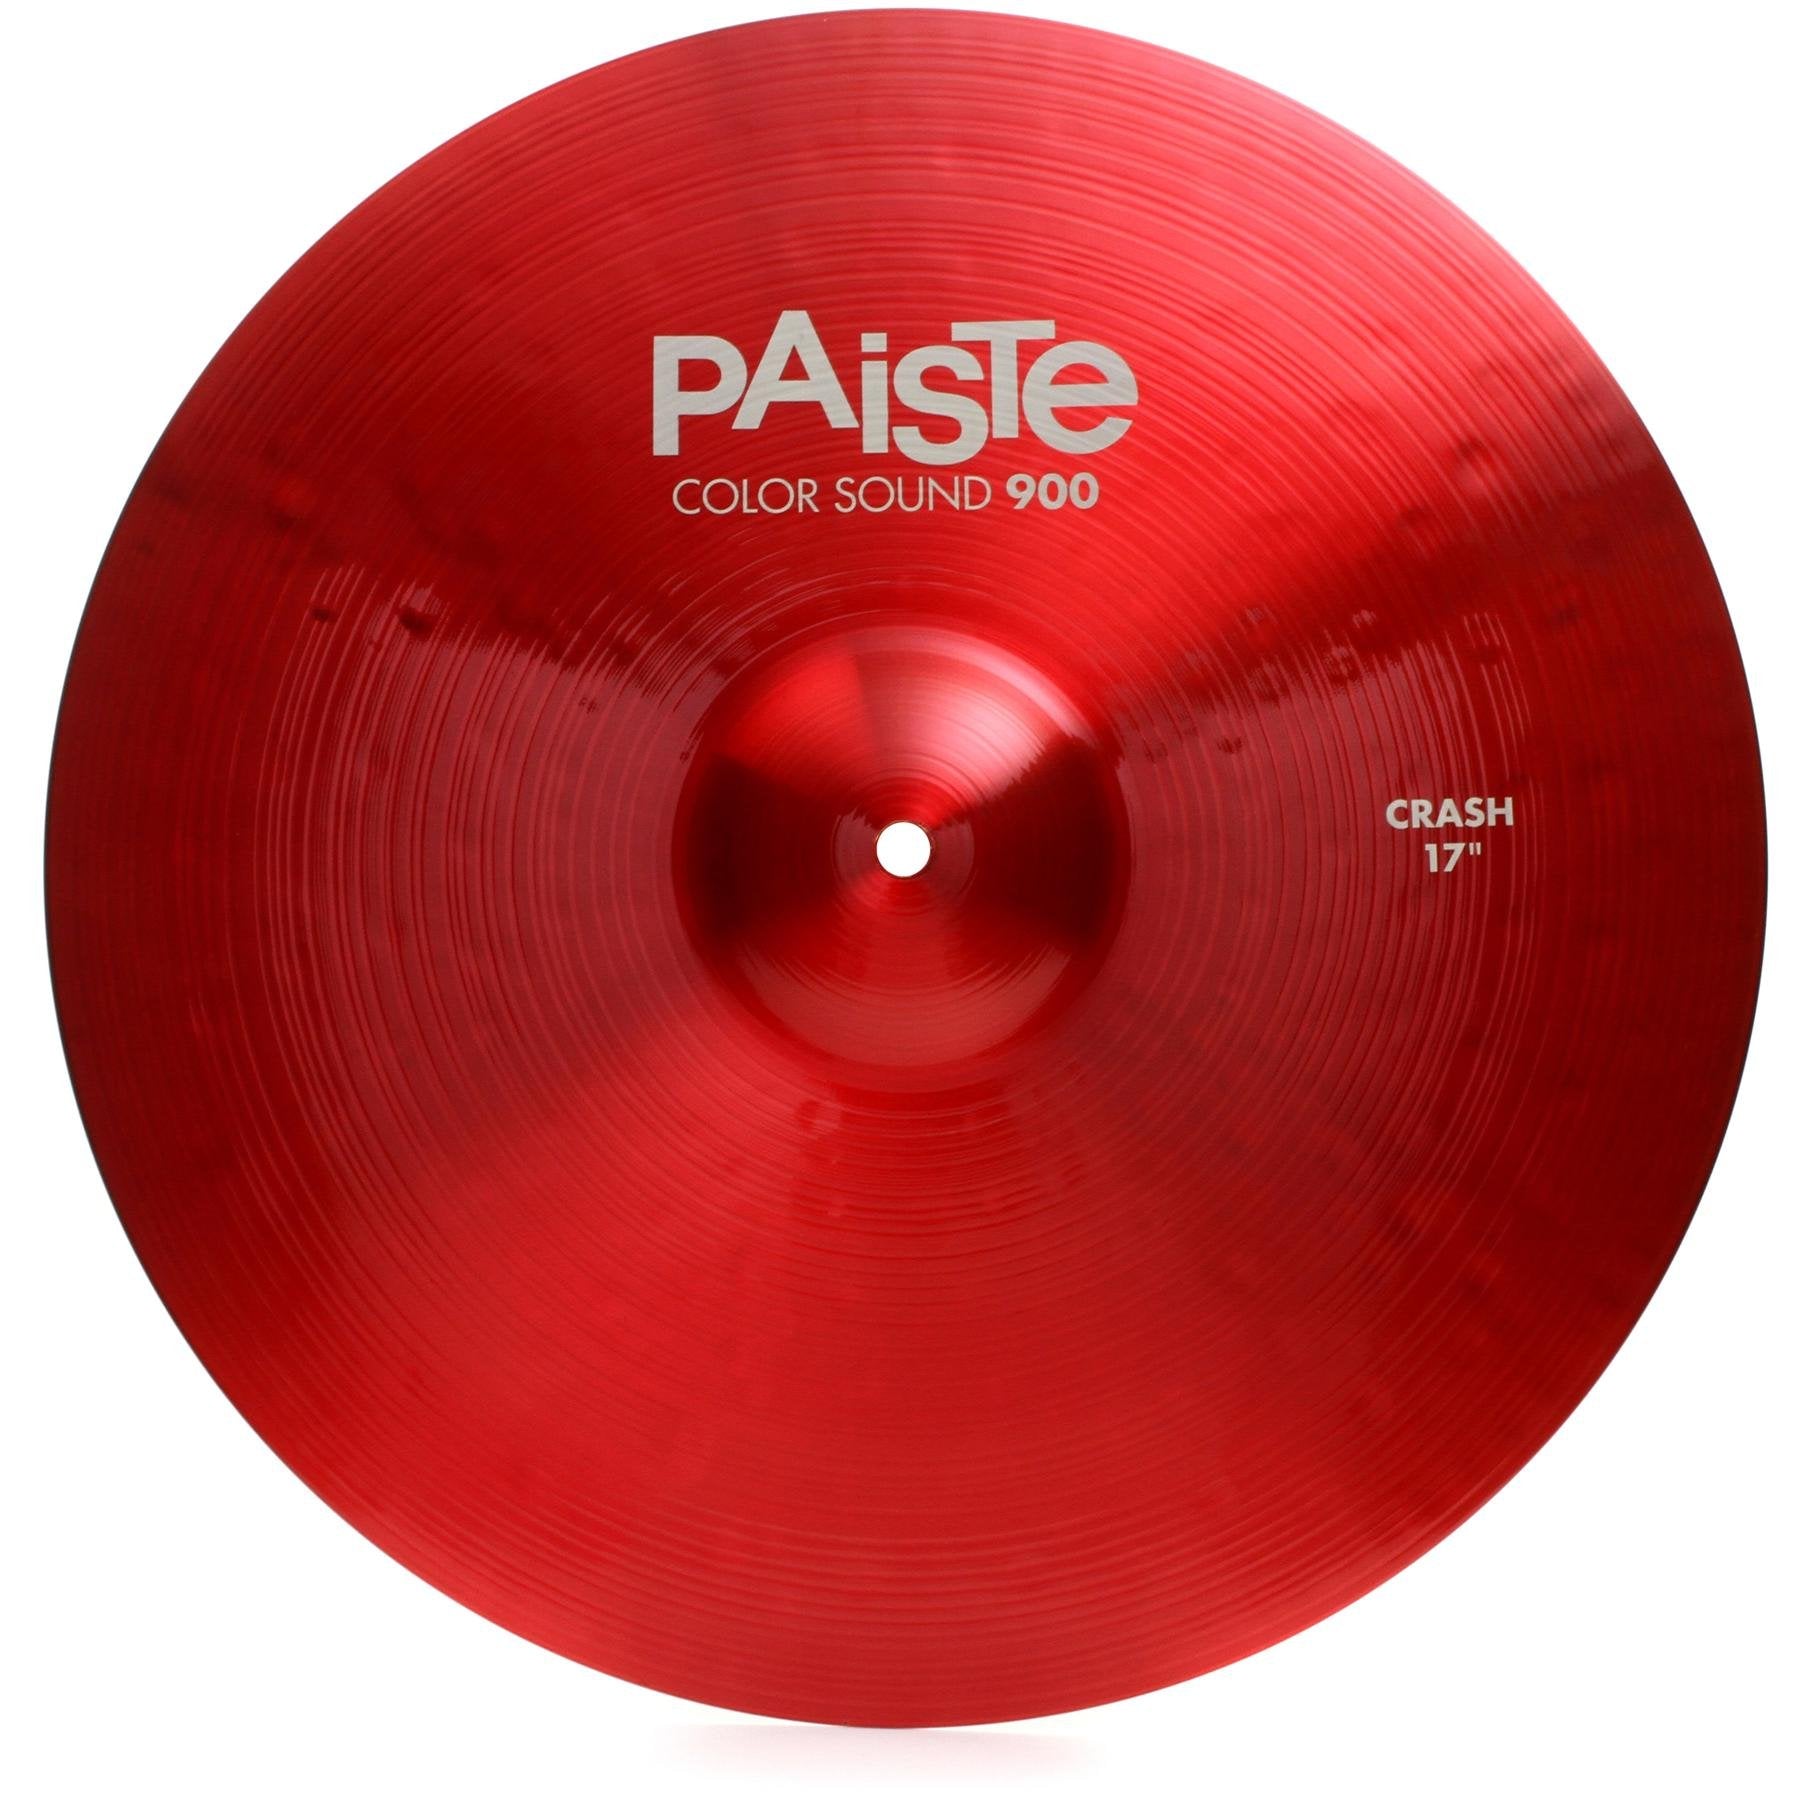 PAISTE Color Sound 900 17" Crash Cymbal (Available in 3 colors)